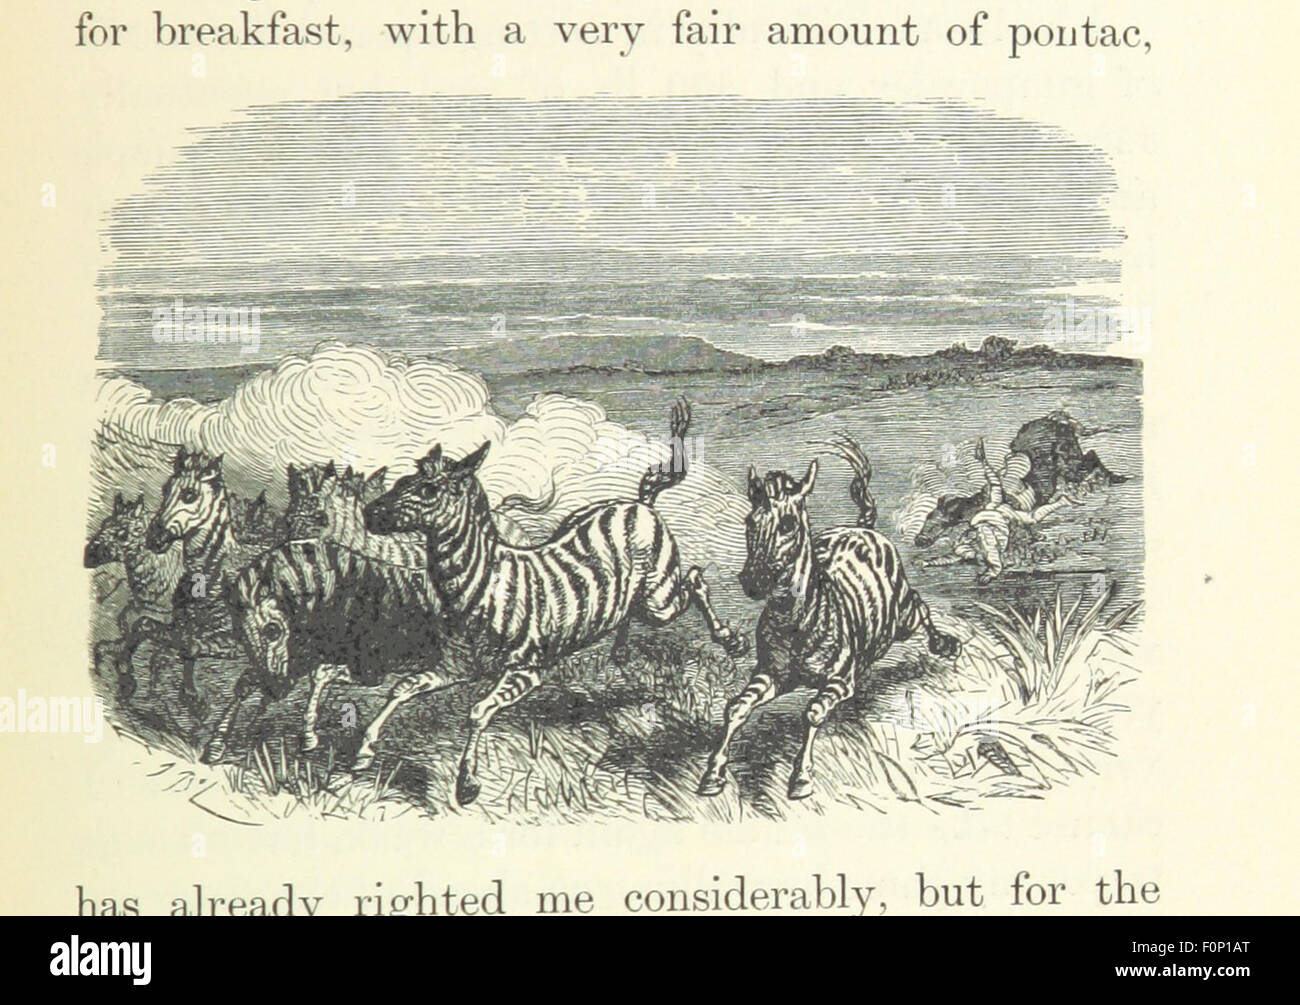 Image taken from page 391 of '[African Hunting from Natal to the Zambesi including Lake Ngami, the Kalahari Desert, &c. from 1852 to 1860 ... With illustrations [including a portrait] by James Wolf and J. B. Zwecker.]' Image taken from page 391 of '[African Hunting from Natal Stock Photo